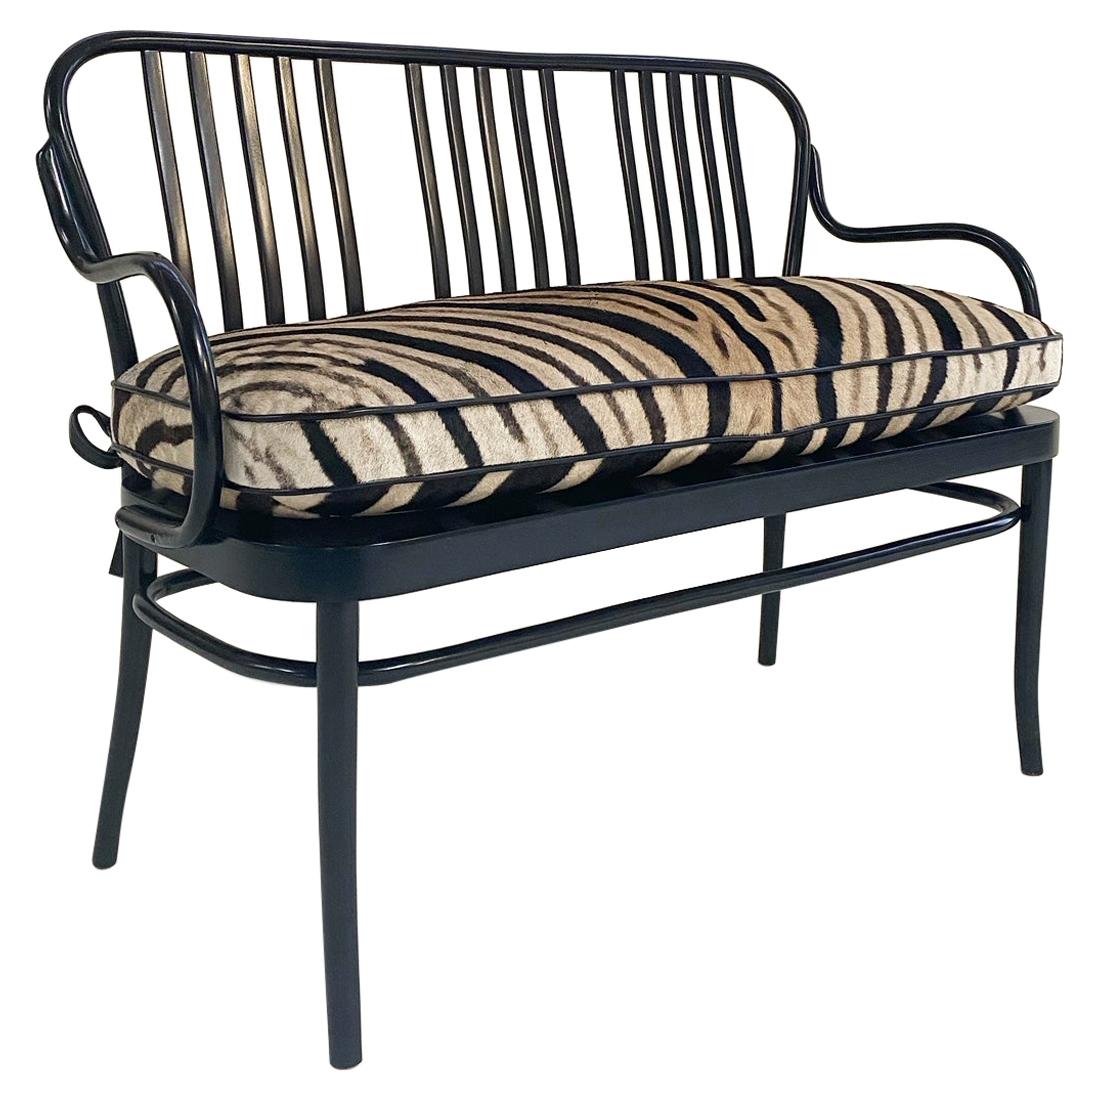 Josef Frank for Thonet Bentwood Bench with Zebra Hide Cushion